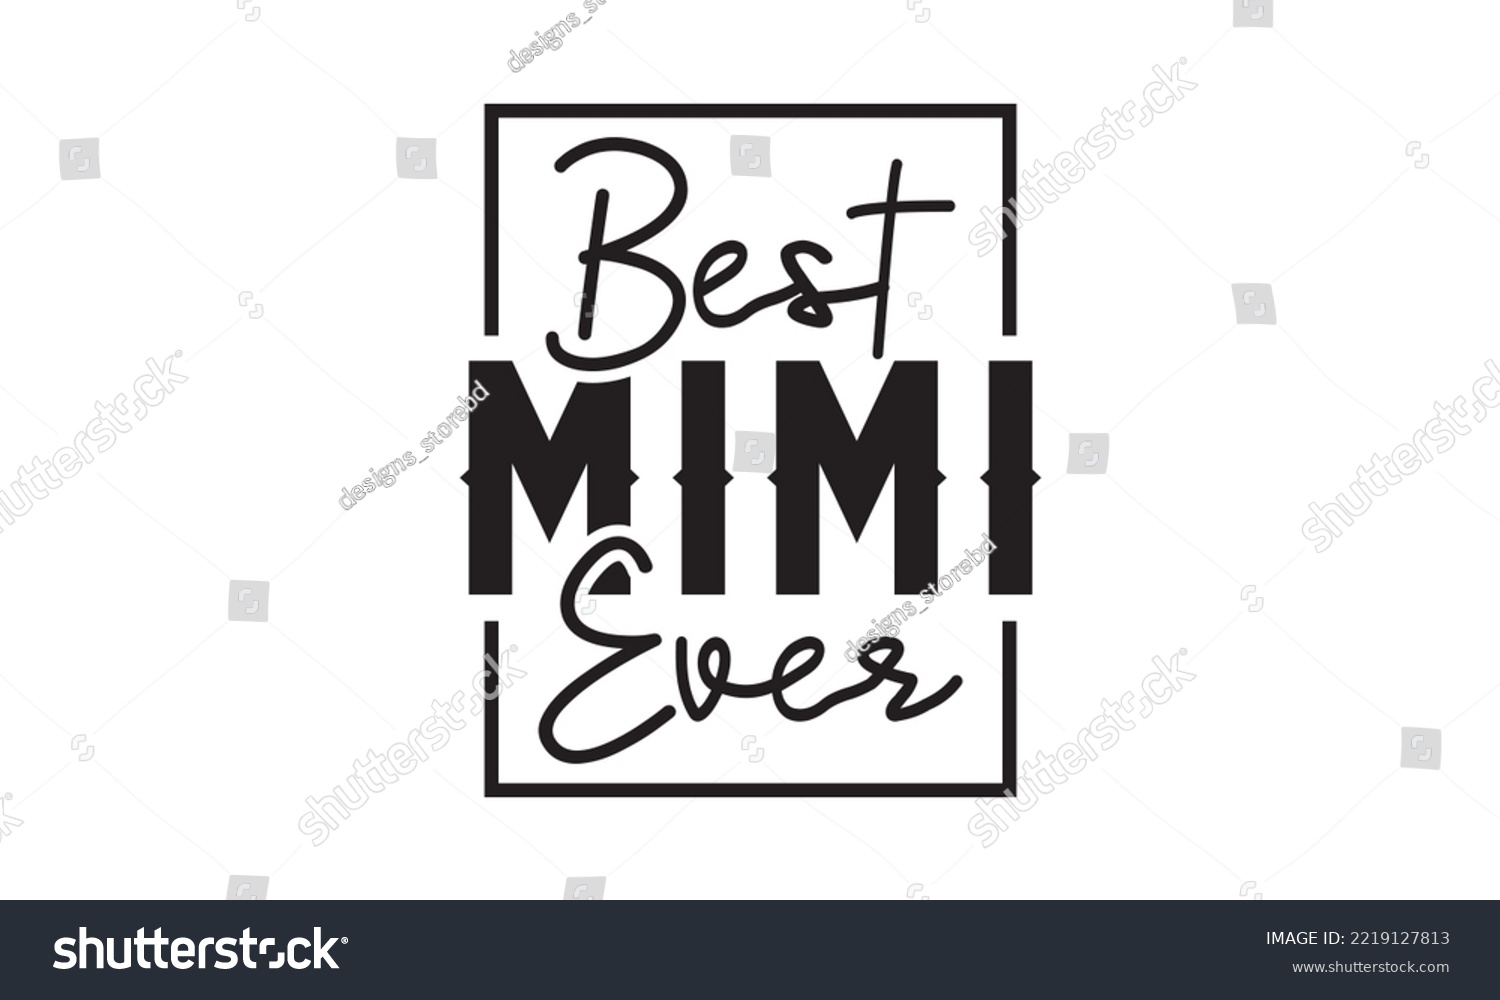 SVG of Best Mimi Ever Svg, Butterfly svg, Butterfly svg t-shirt design, butterflies and daisies positive quote flower watercolor margarita mariposa stationery, mug, t shirt, svg, eps 10 svg